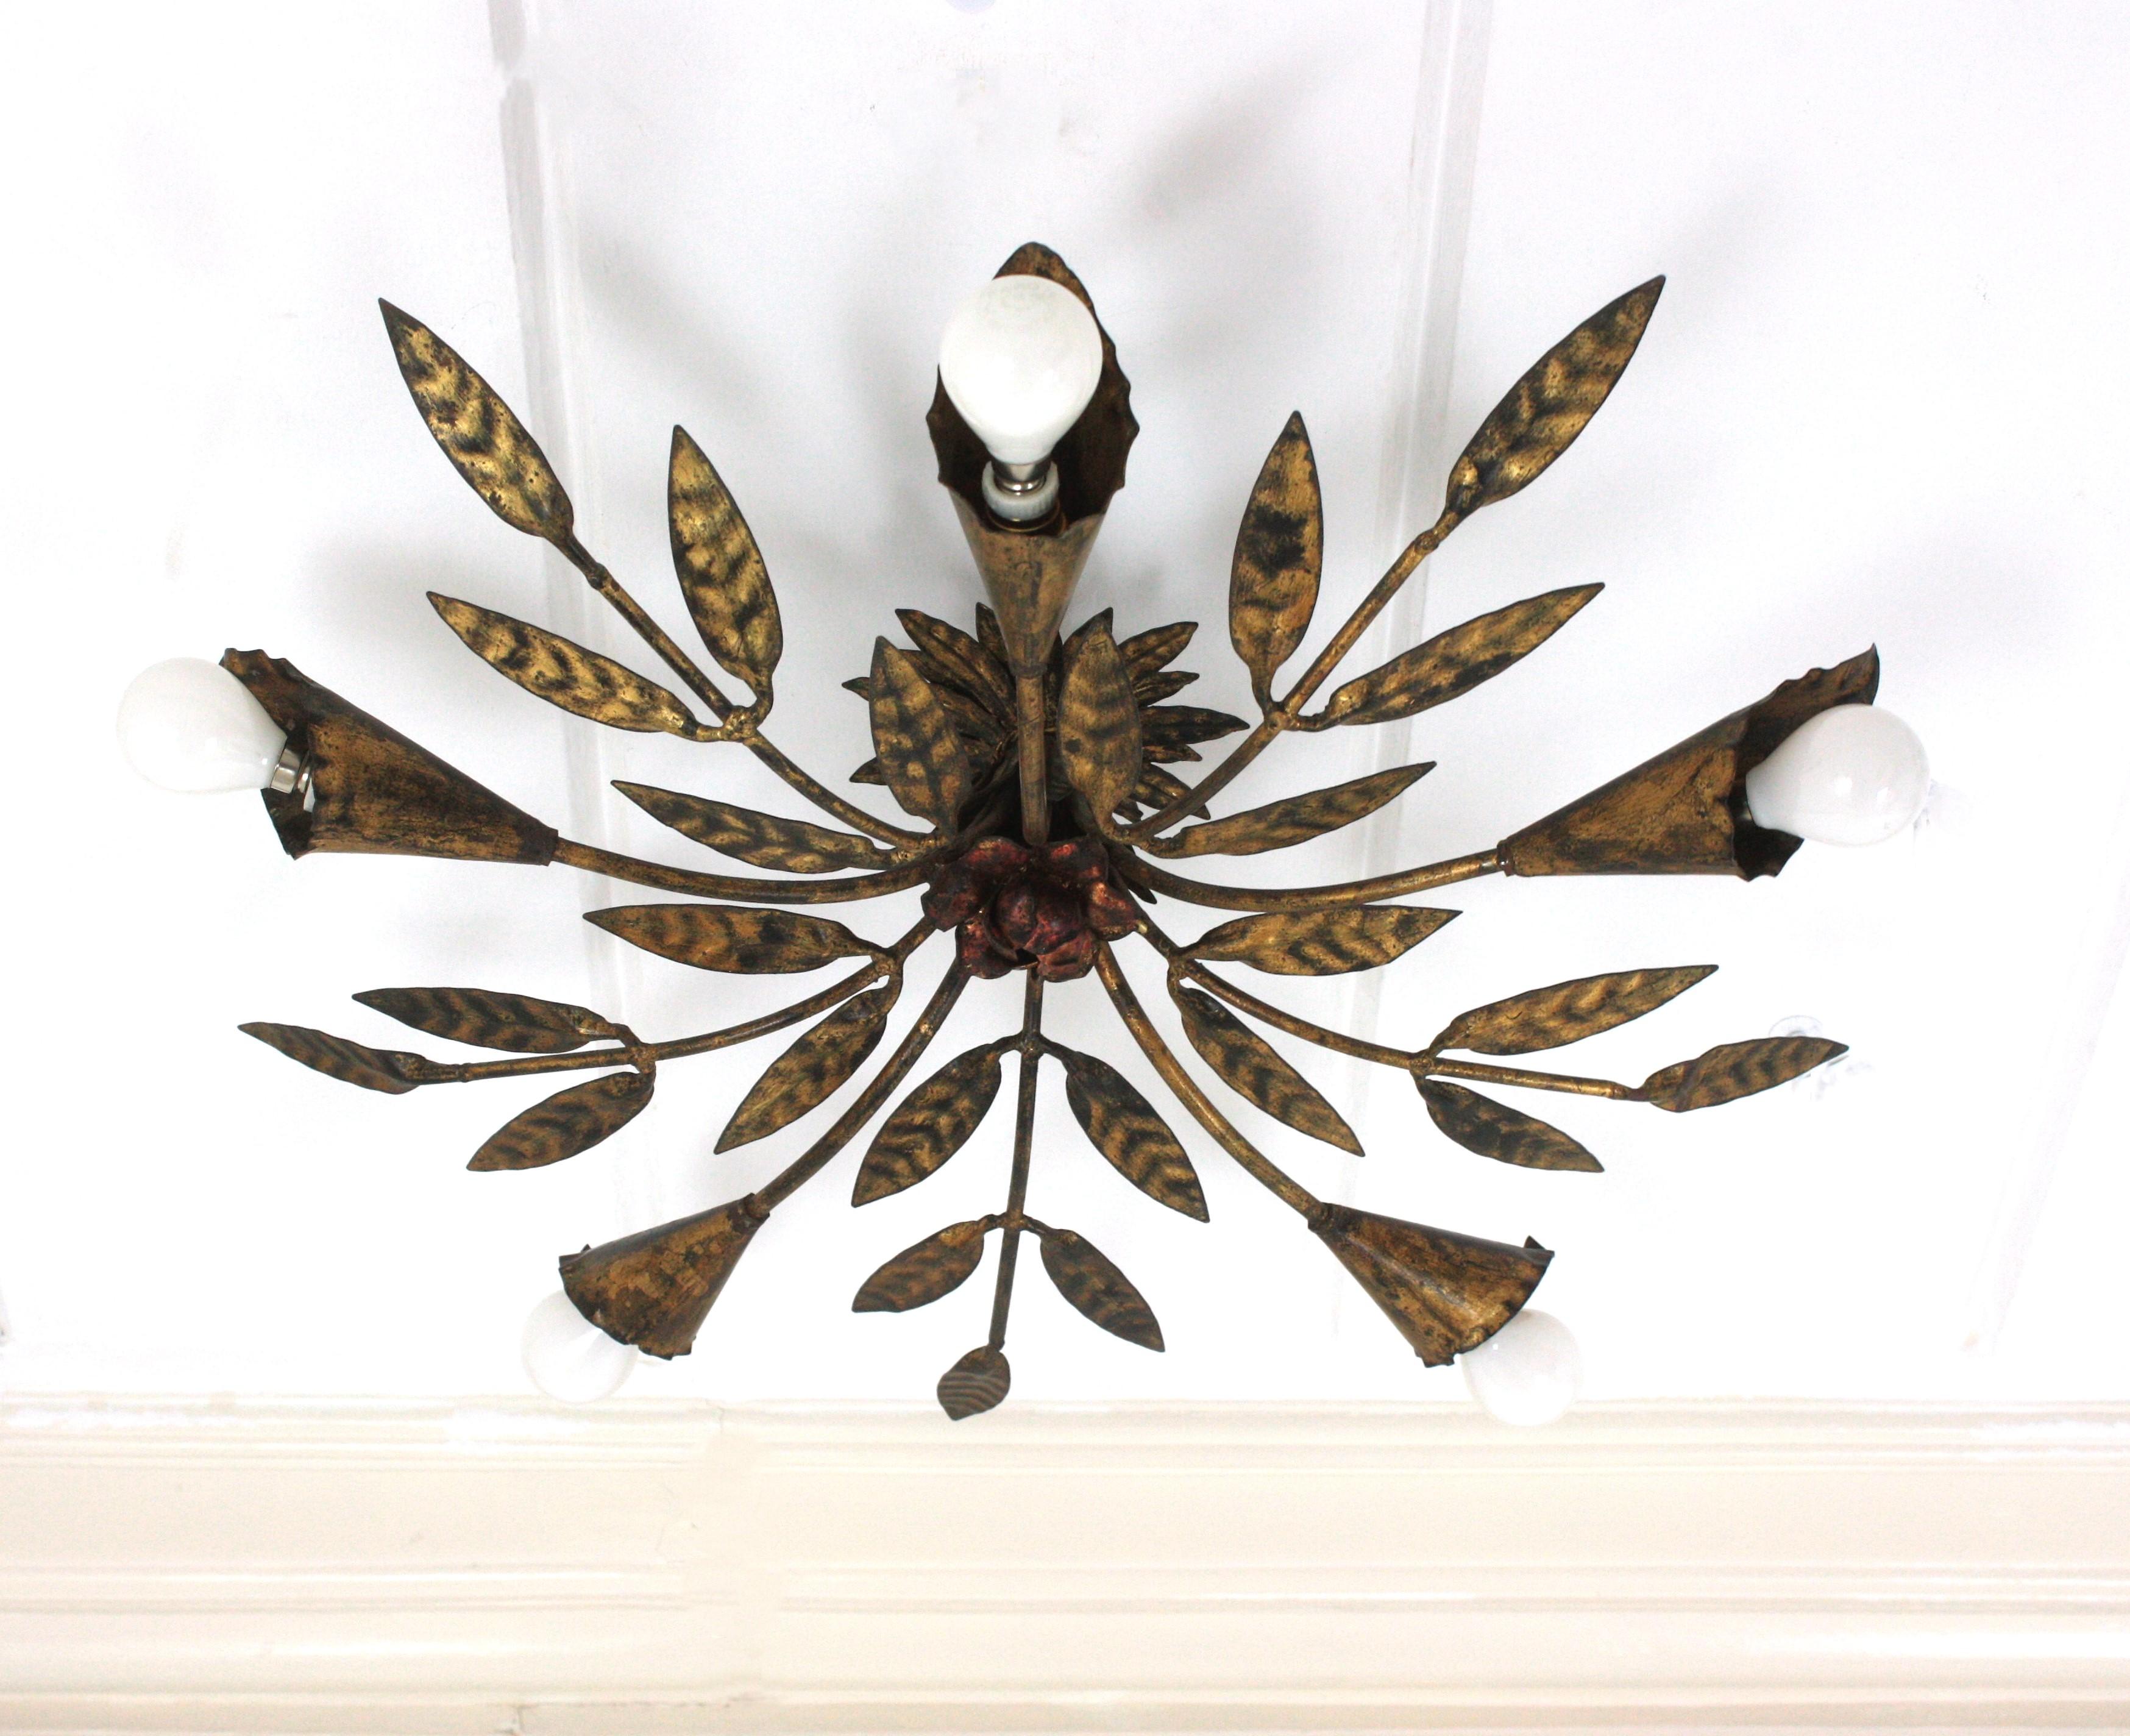 Outstanding spanish foliage sunburst flush mount ceiling light in gilt iron, Ferro Art, 1950s
To be used as ceiling light fixture or as chandelier / pendant light adding a chain to the desired height.
This five-light ceiling lamp features an